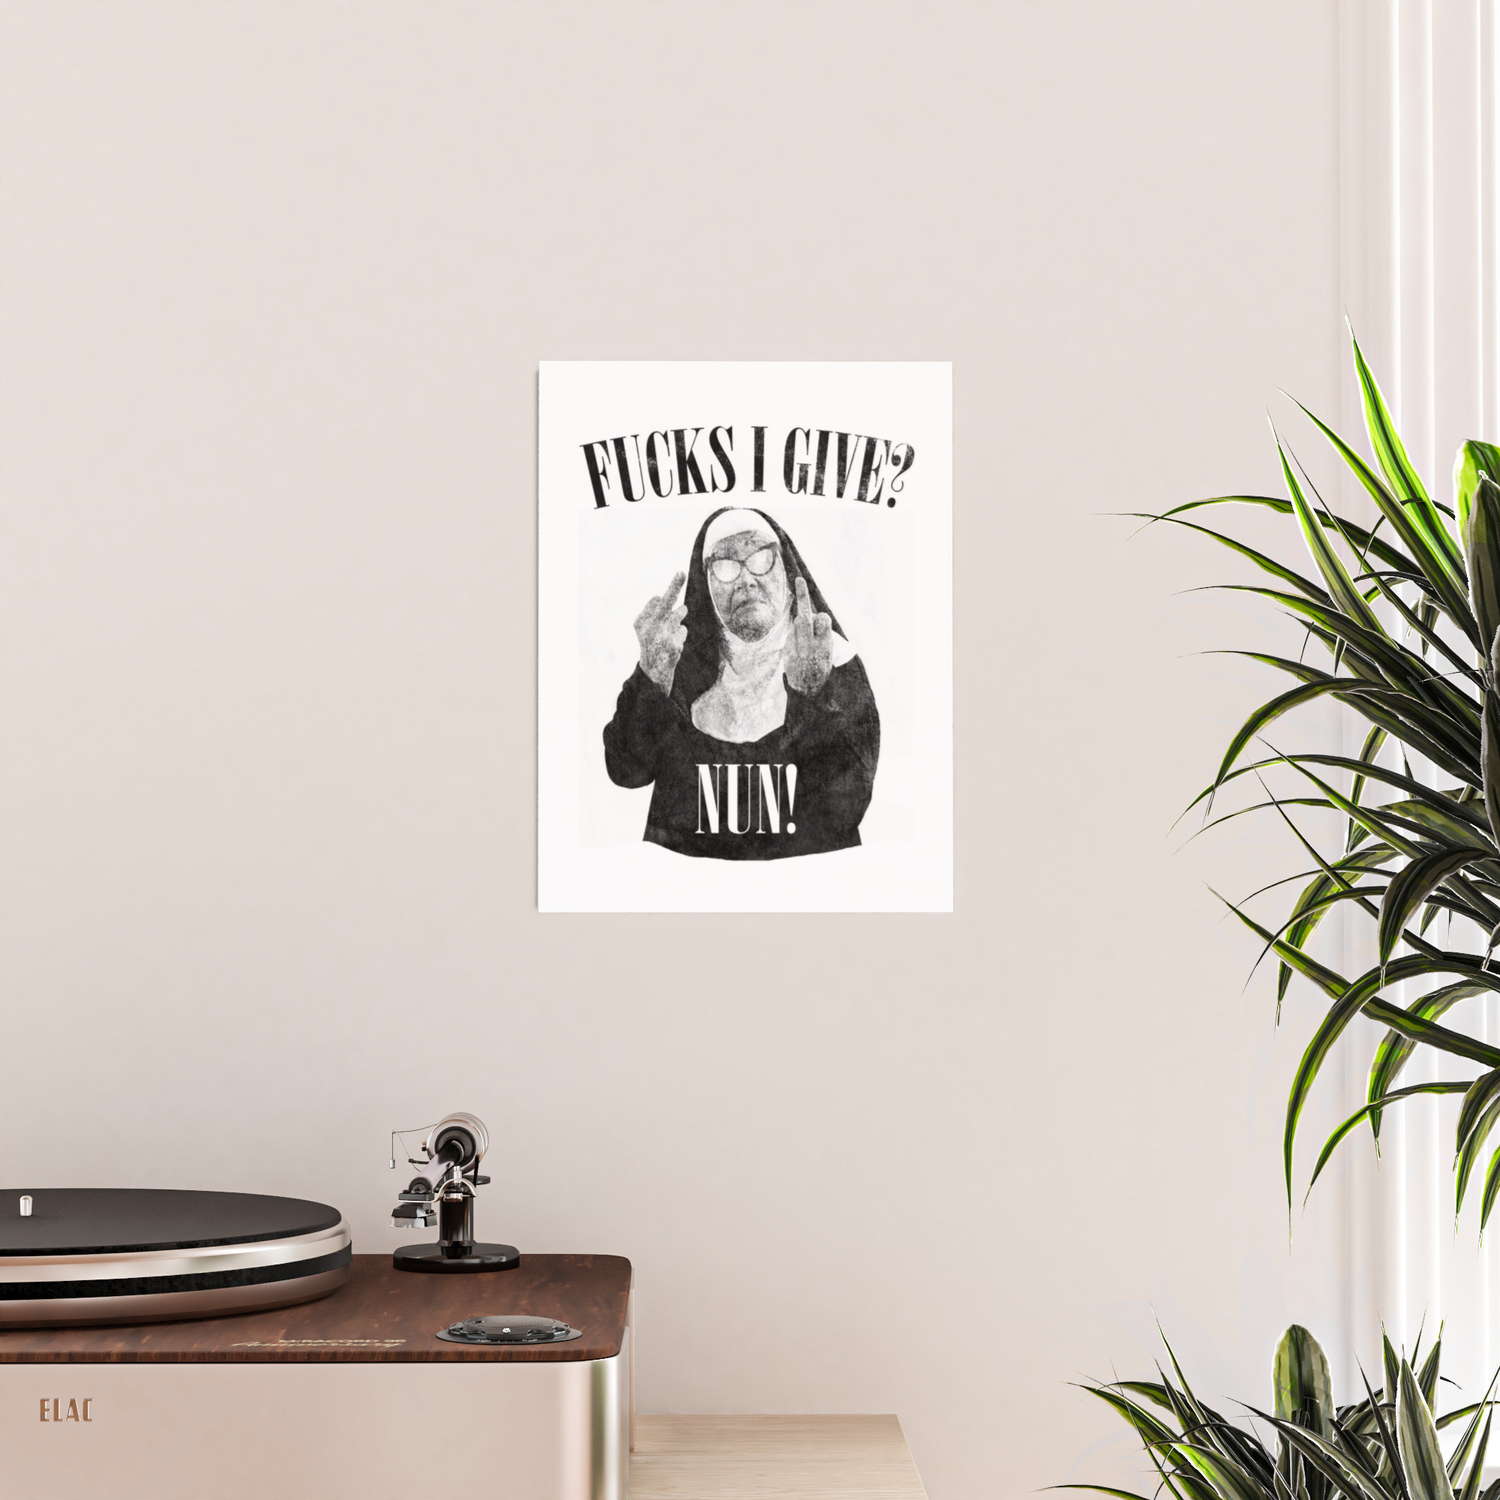 Funny Fucks I Give, Nun Saying Poster by DirtyAngelFace | Society6